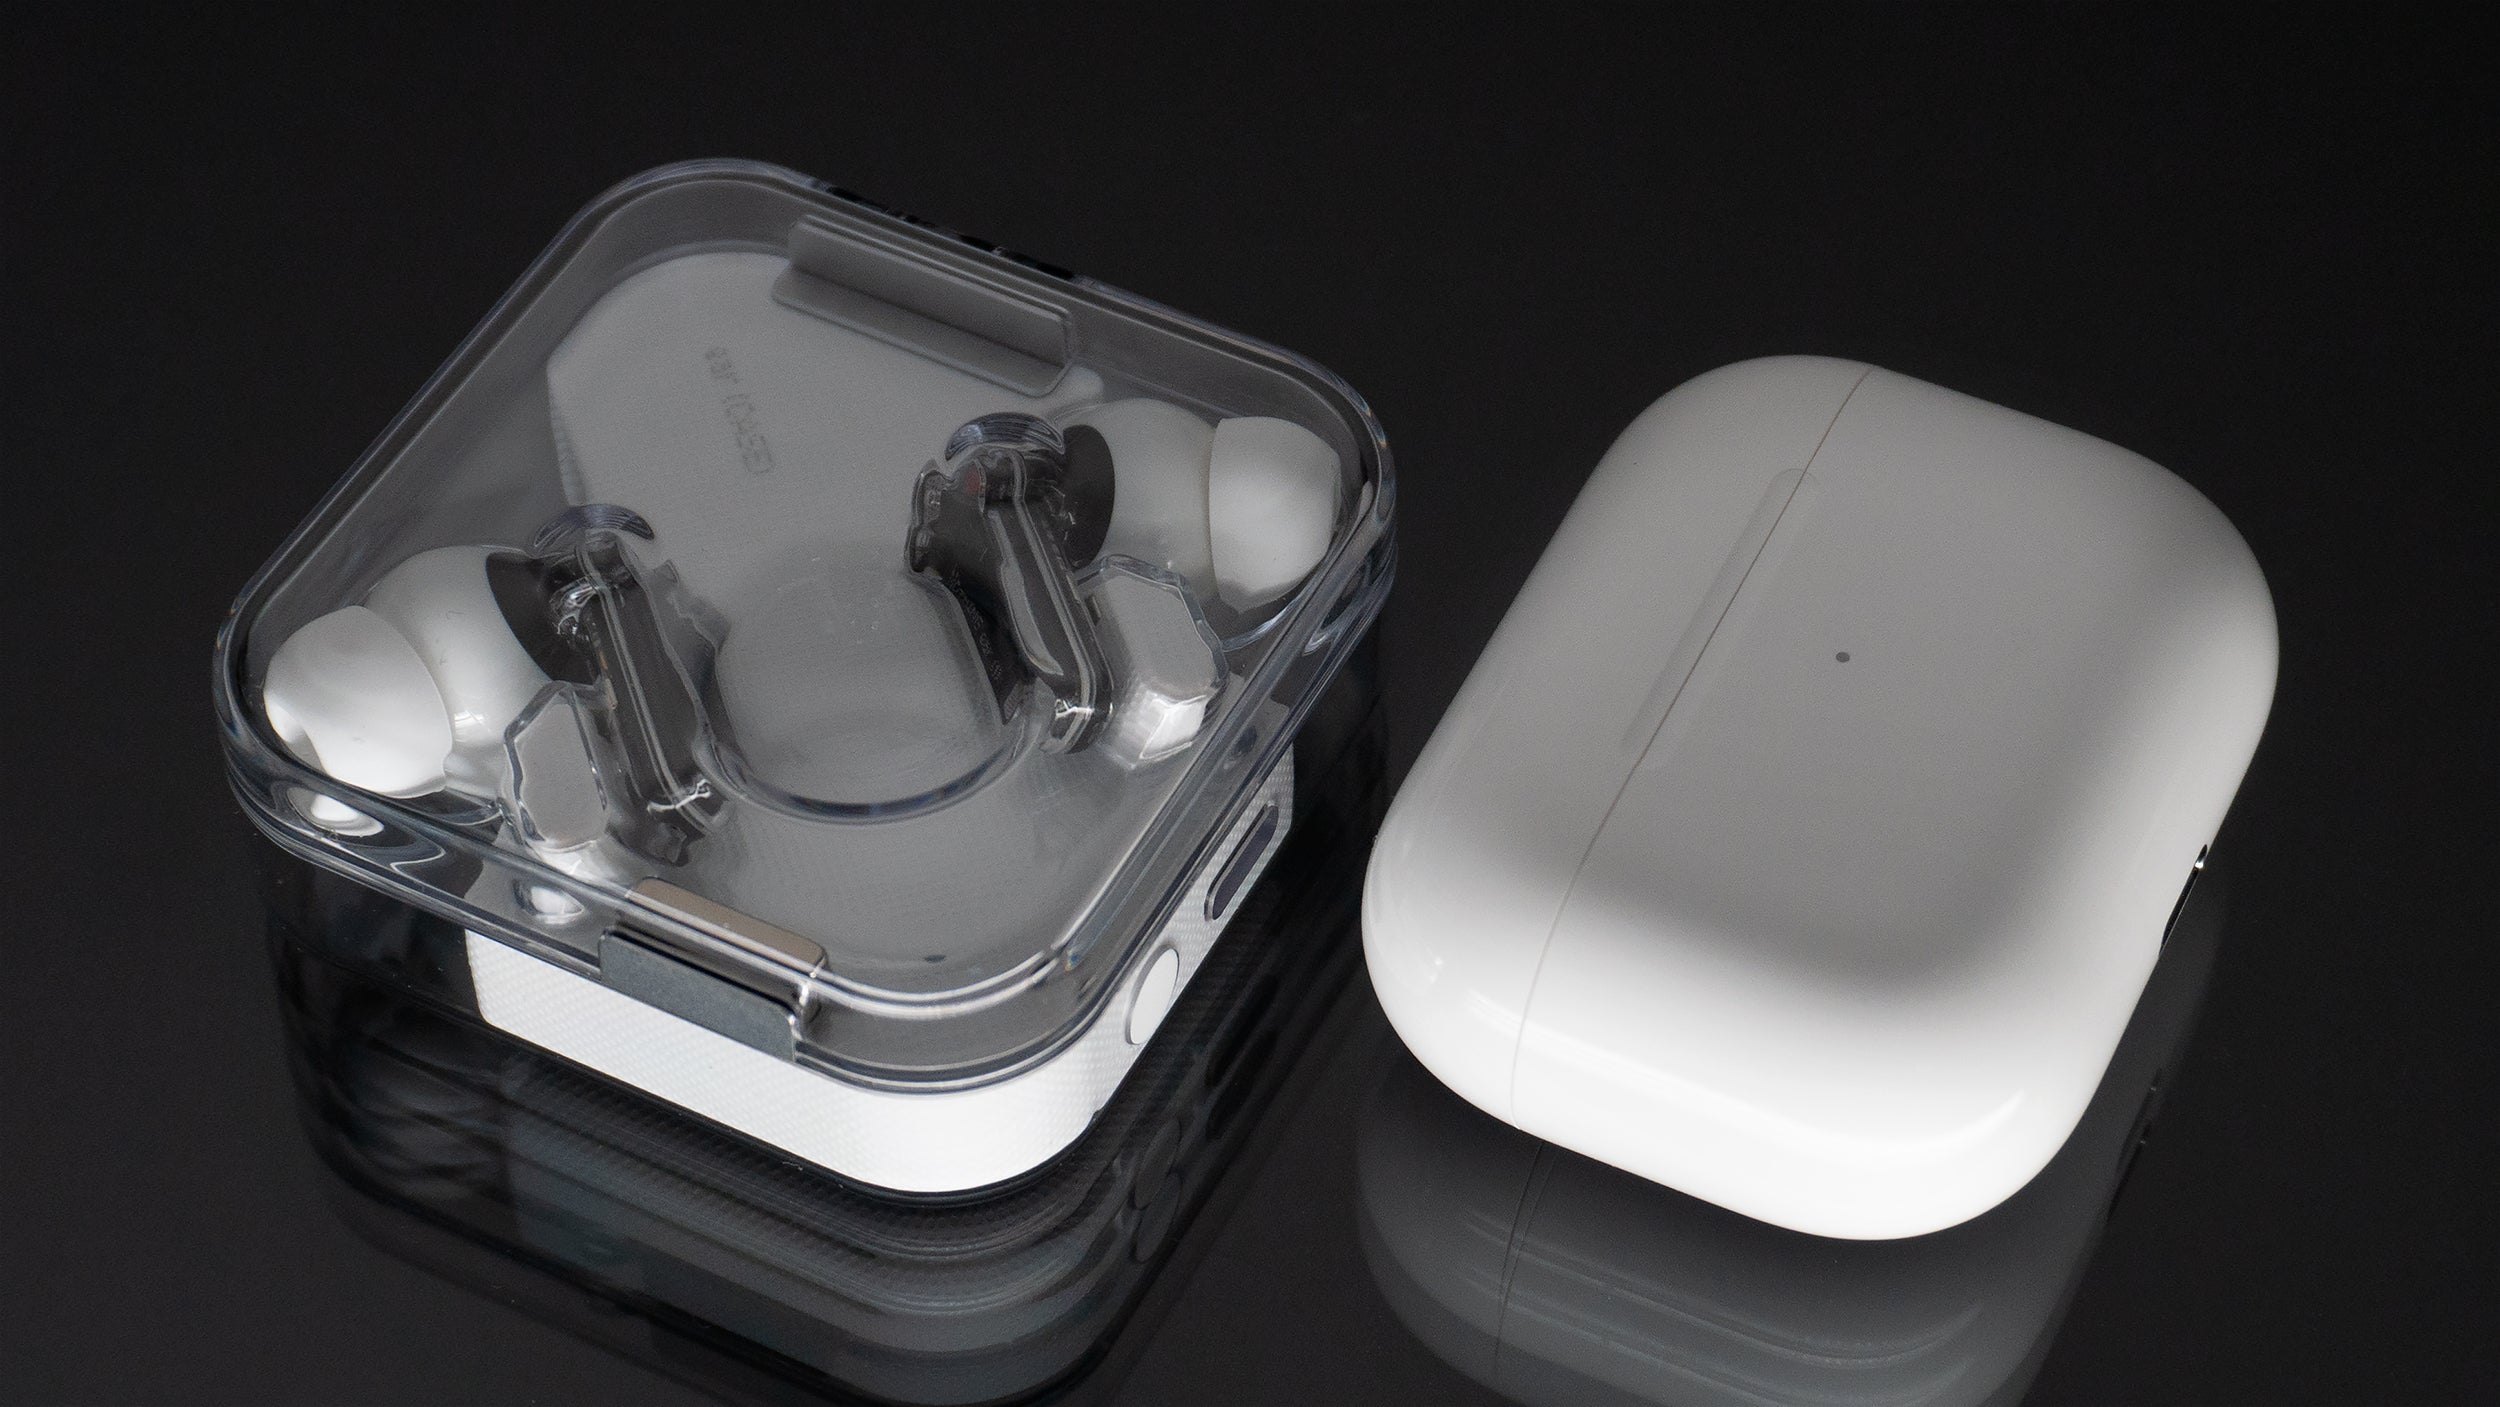 The ear (1) charging case is a bit on the bulky side, but it gives the earbuds up to 34 hours of playback time when away from a power source, compared to 24 hours in total with the AirPods Pro's charging case. (Photo: Andrew Liszewski - Gizmodo)